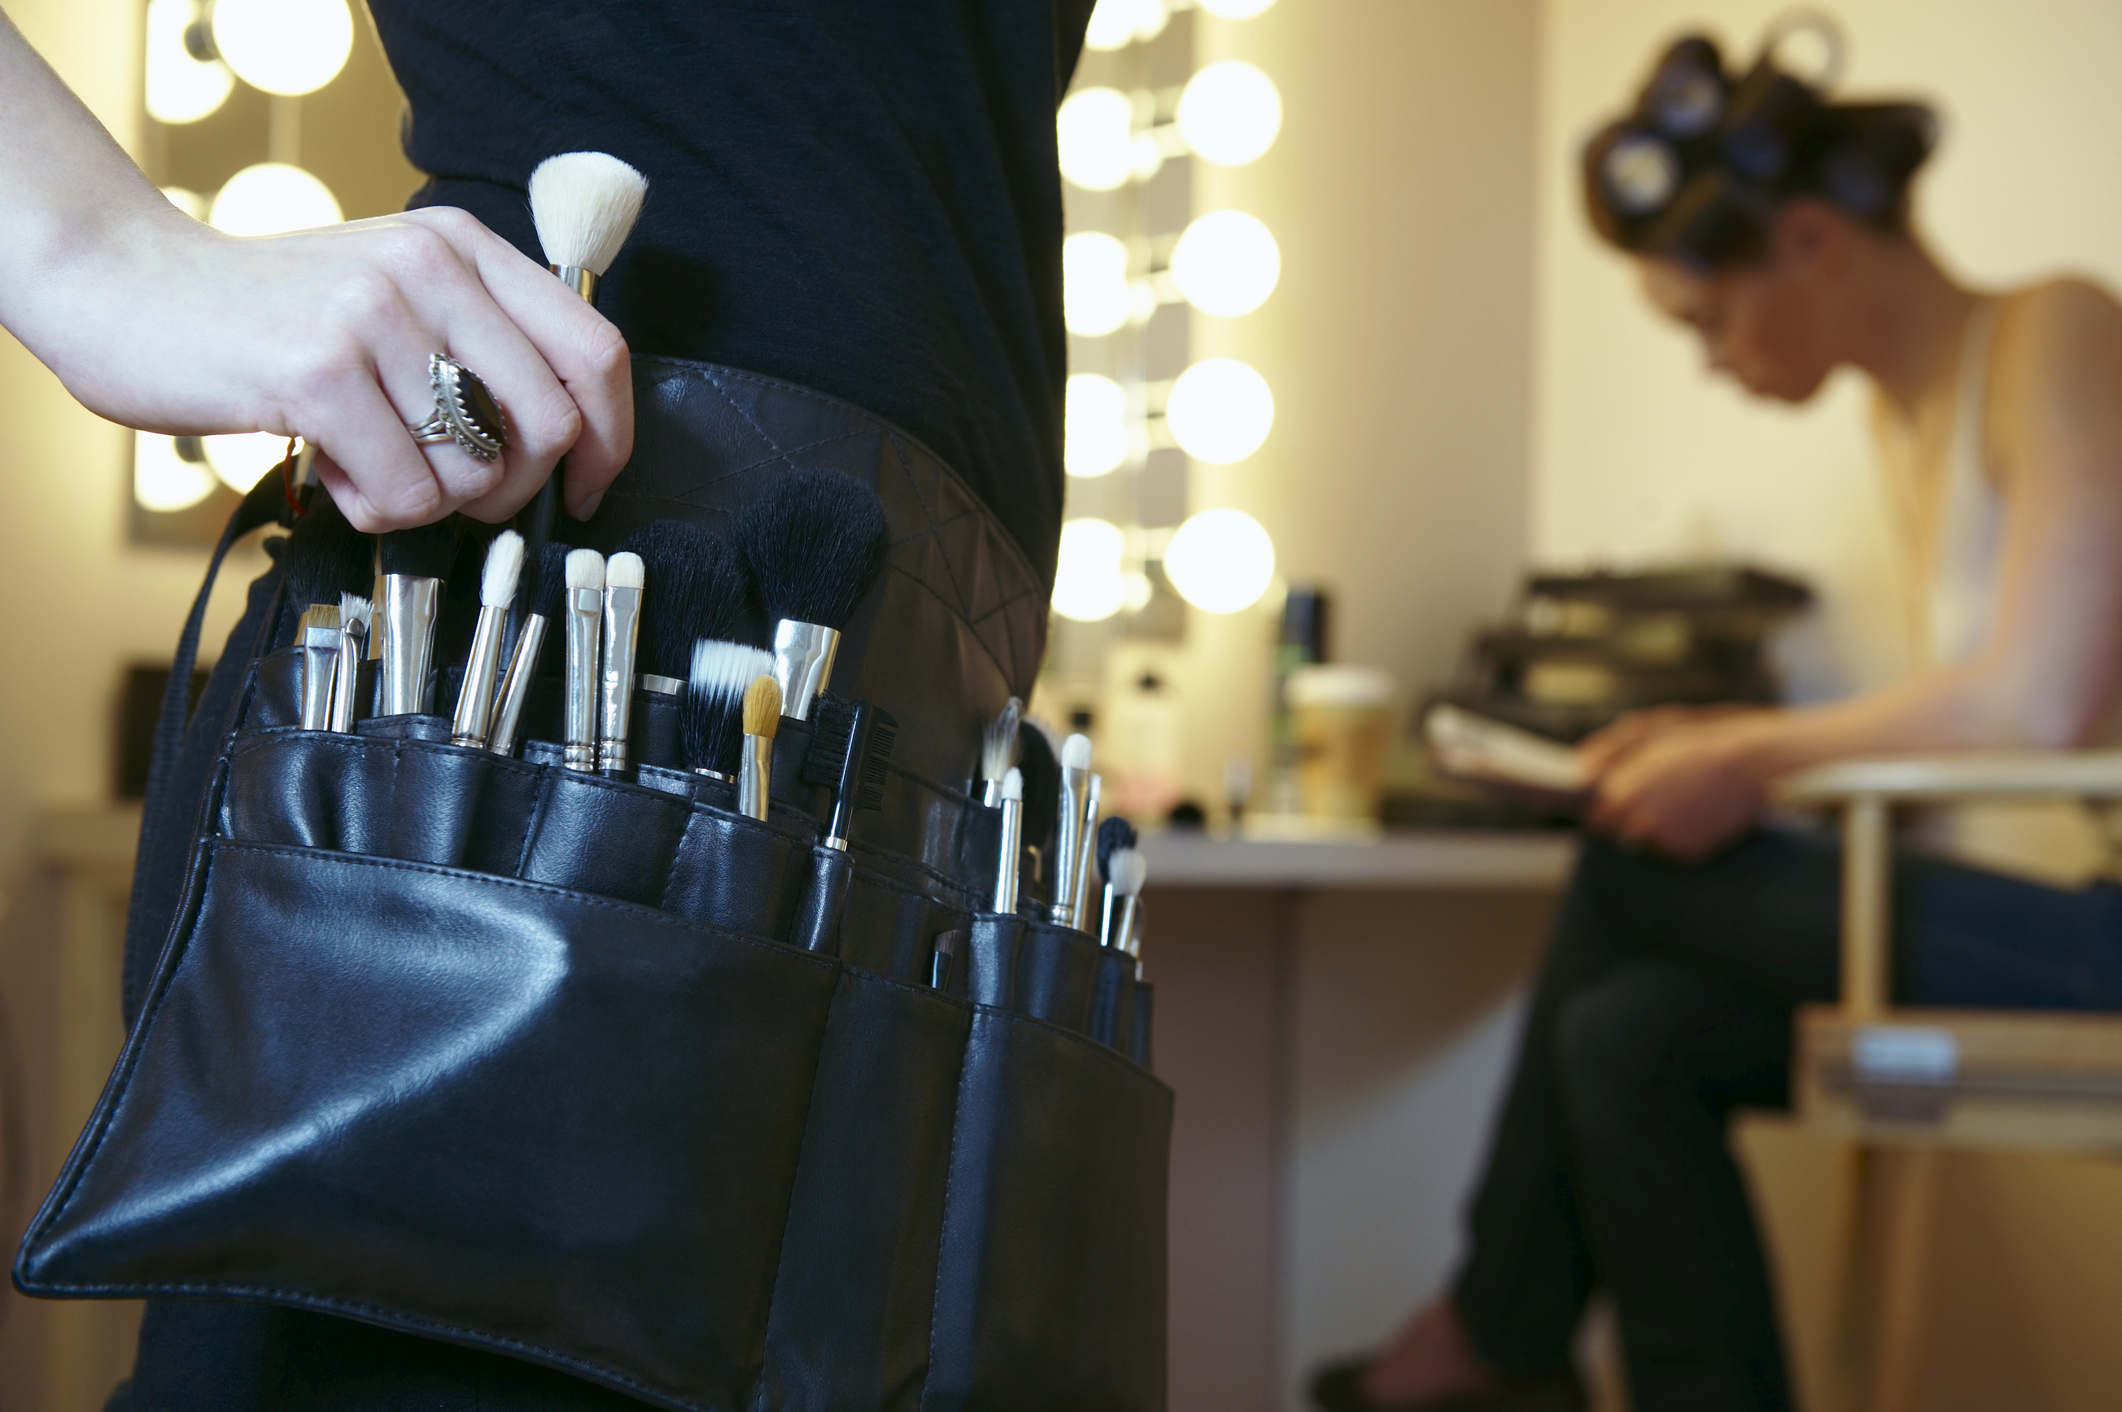 Makeup artist selecting a brush from belt pouch, client in background, interior setting